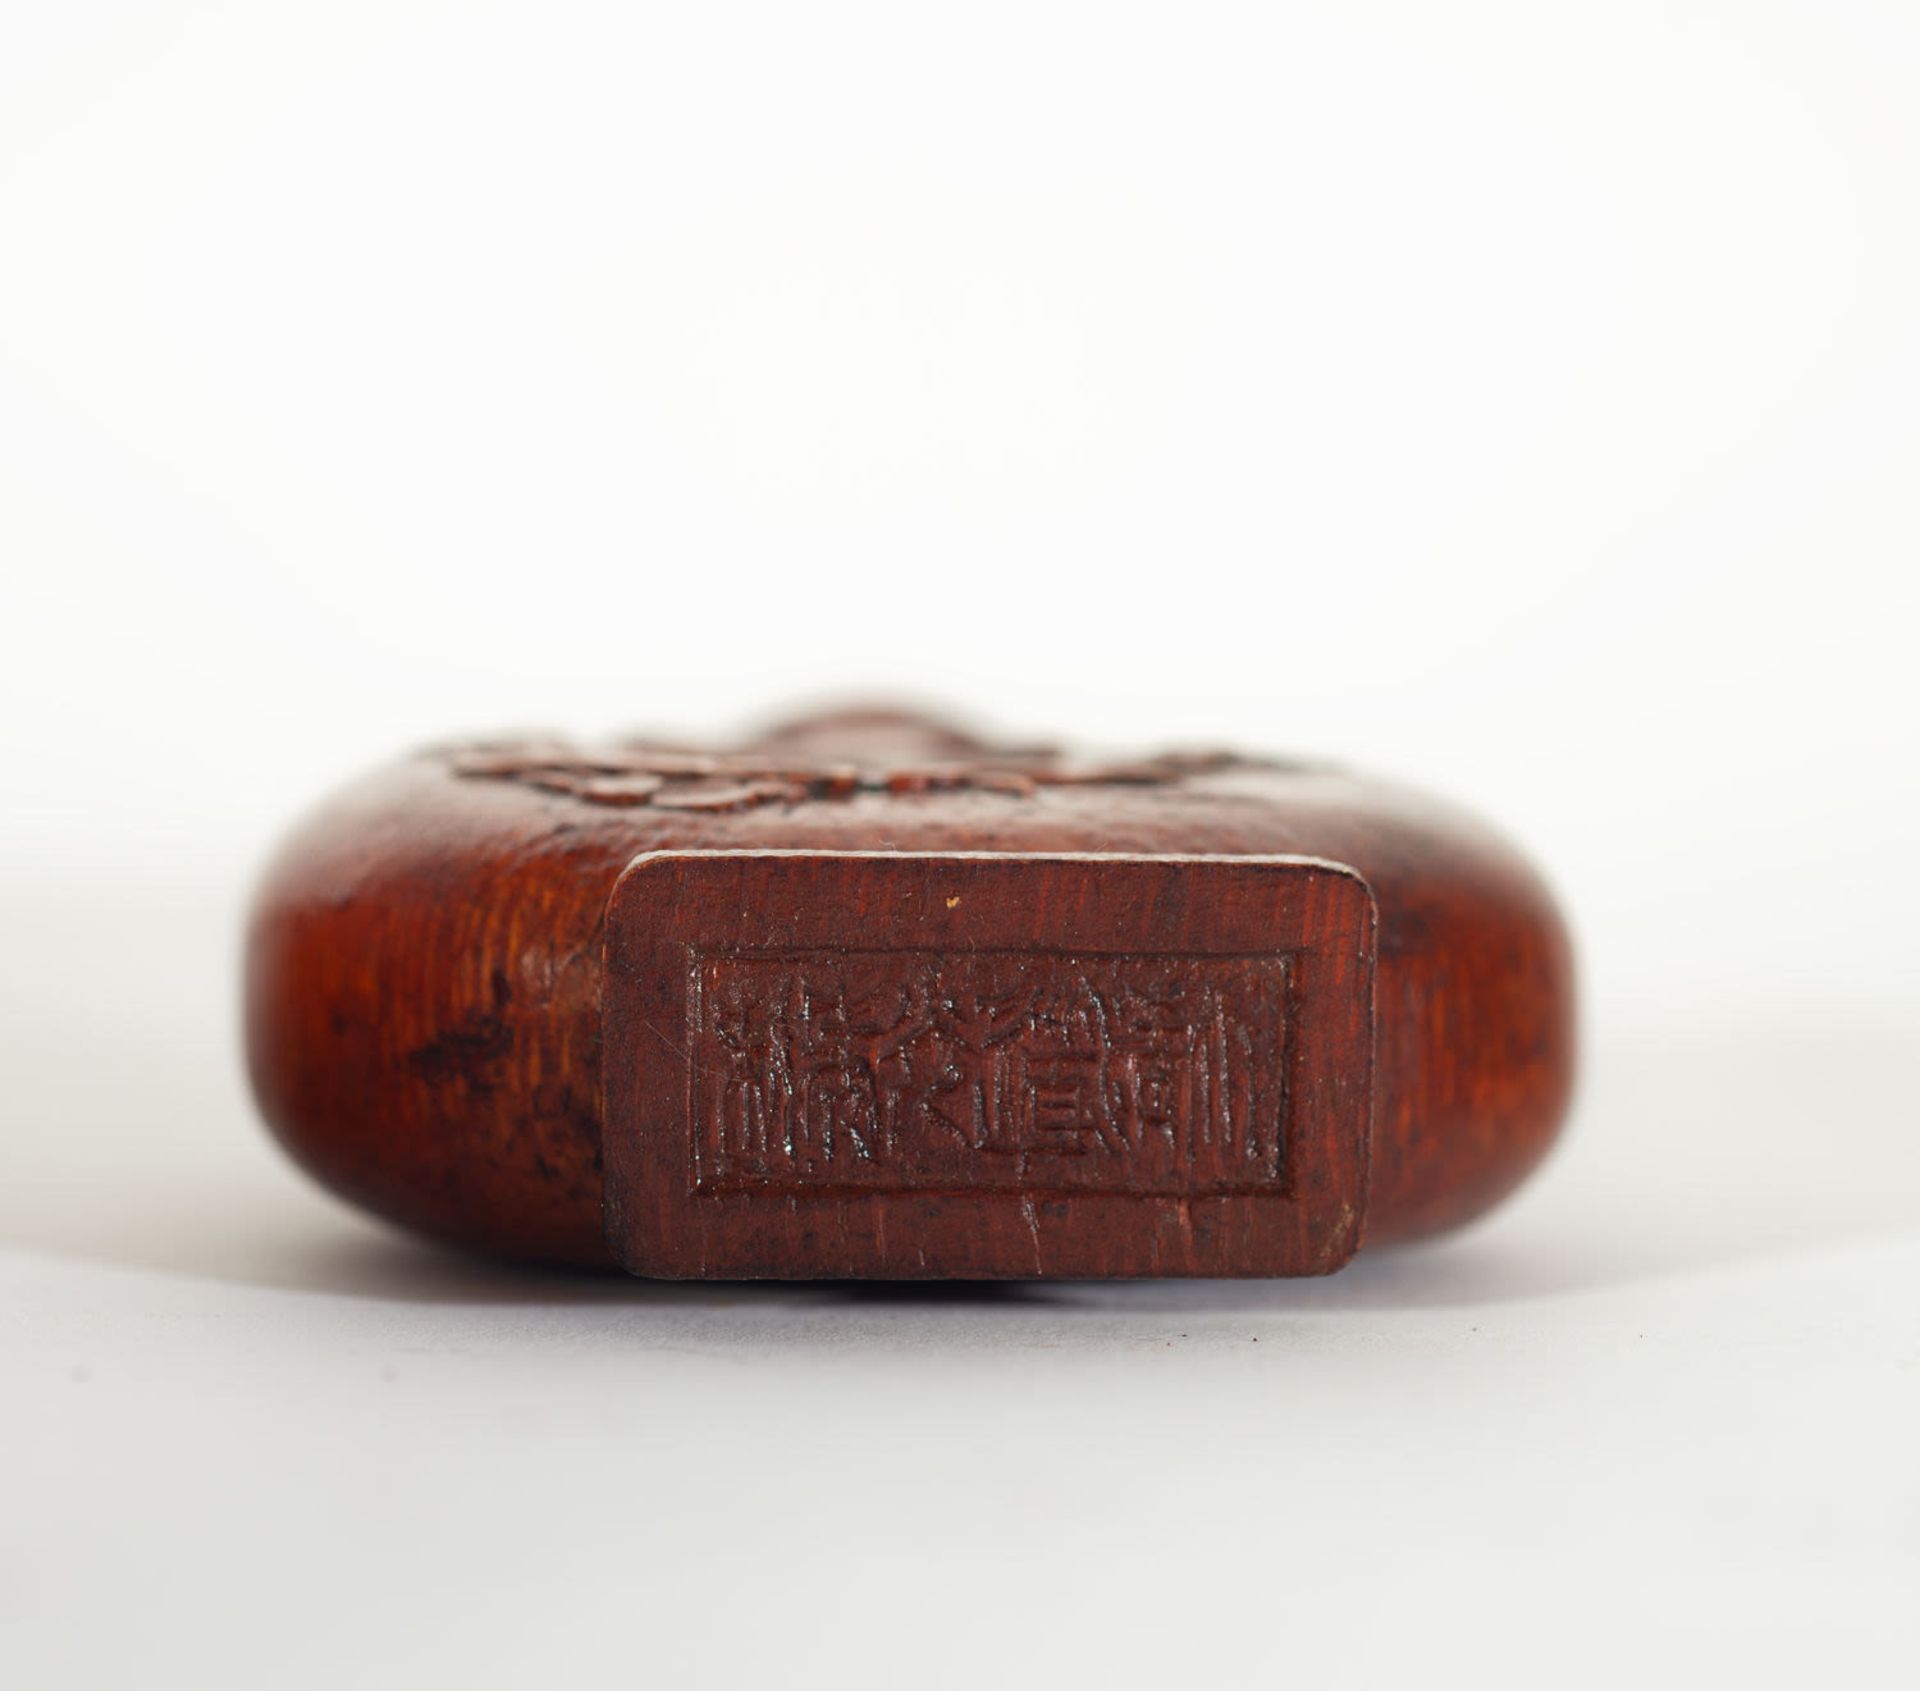 Fine Chinese Imperial Snuff Bottle in Bamboo, Daoguang mark and period (1820-1850) - Image 3 of 3